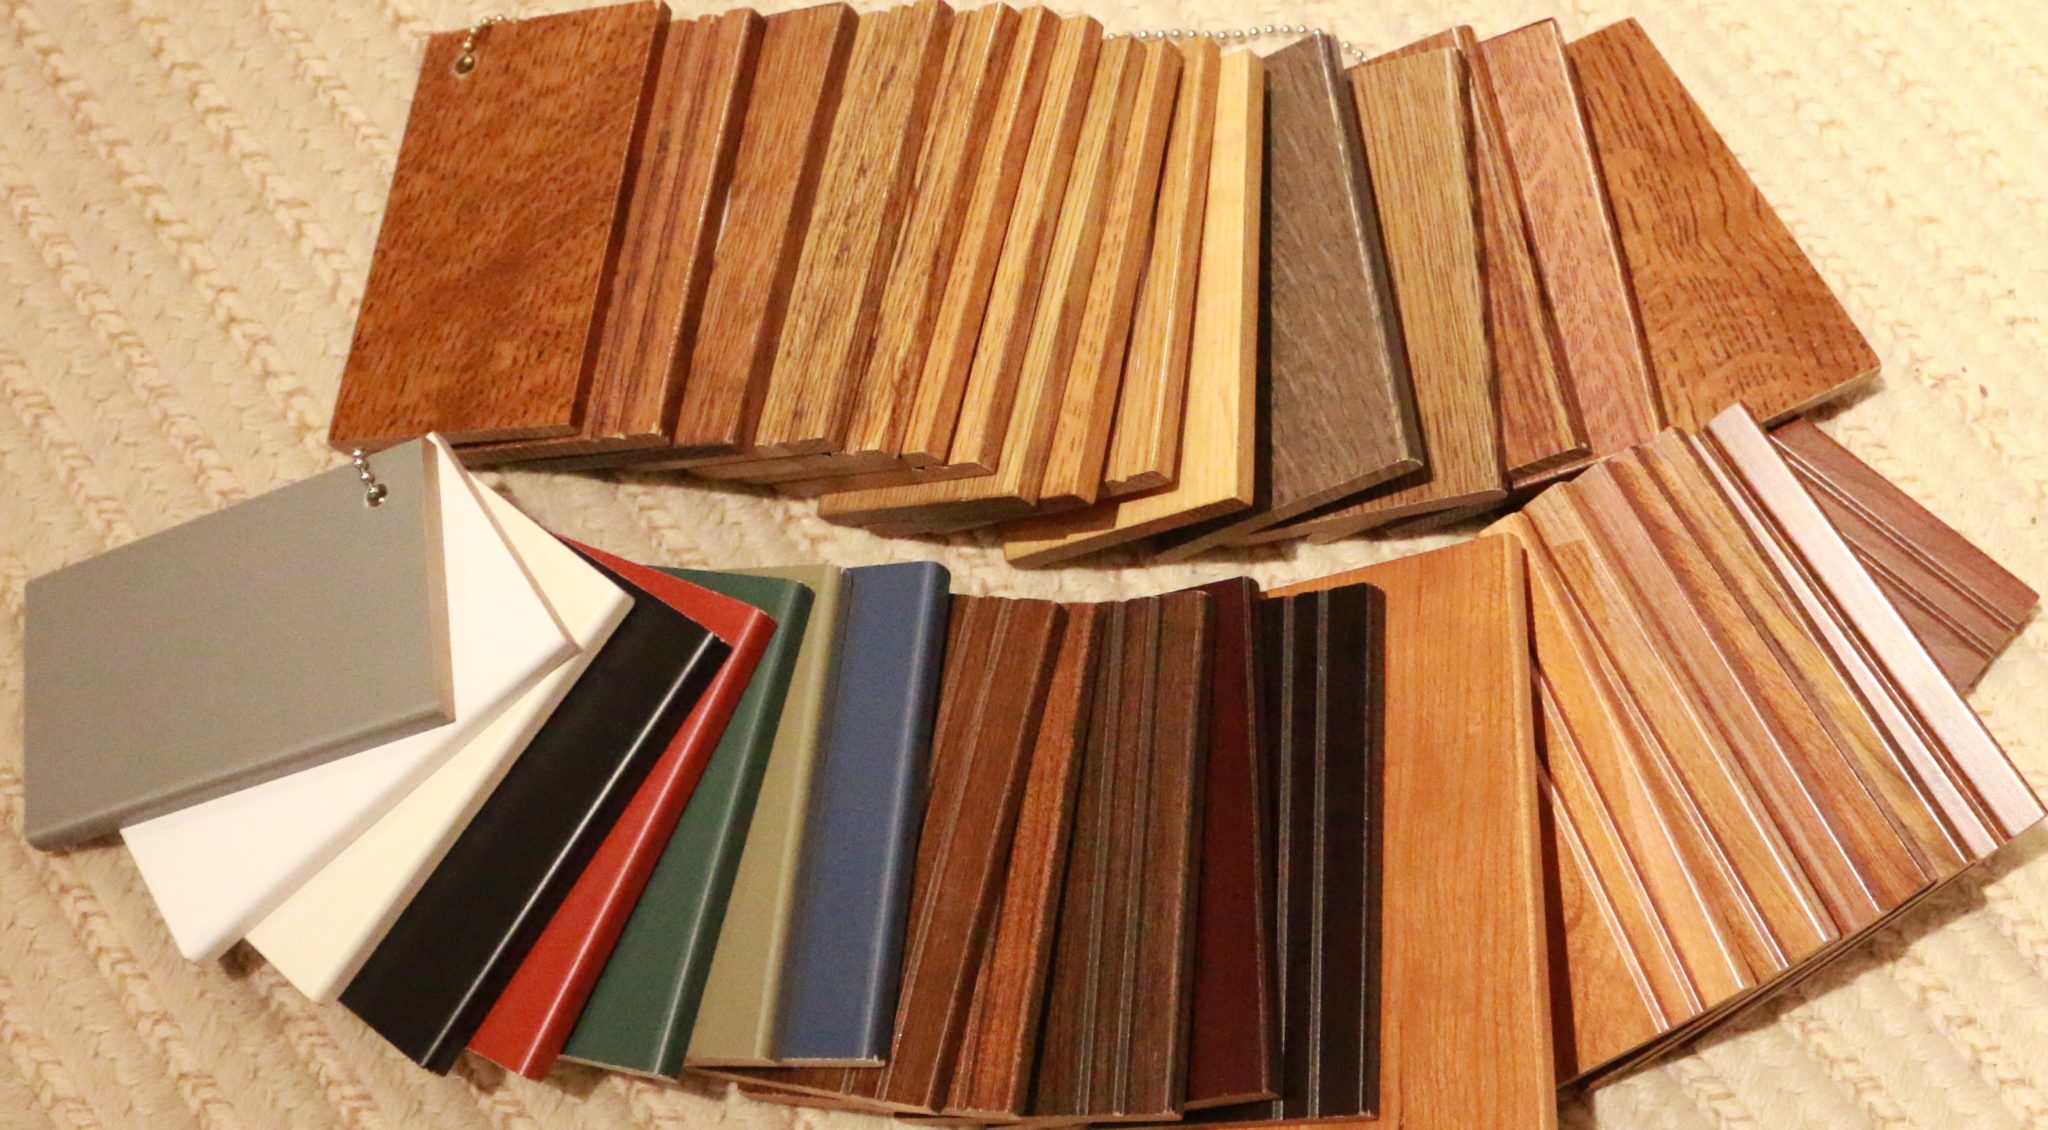 A Sample of Wood Species and Color options 